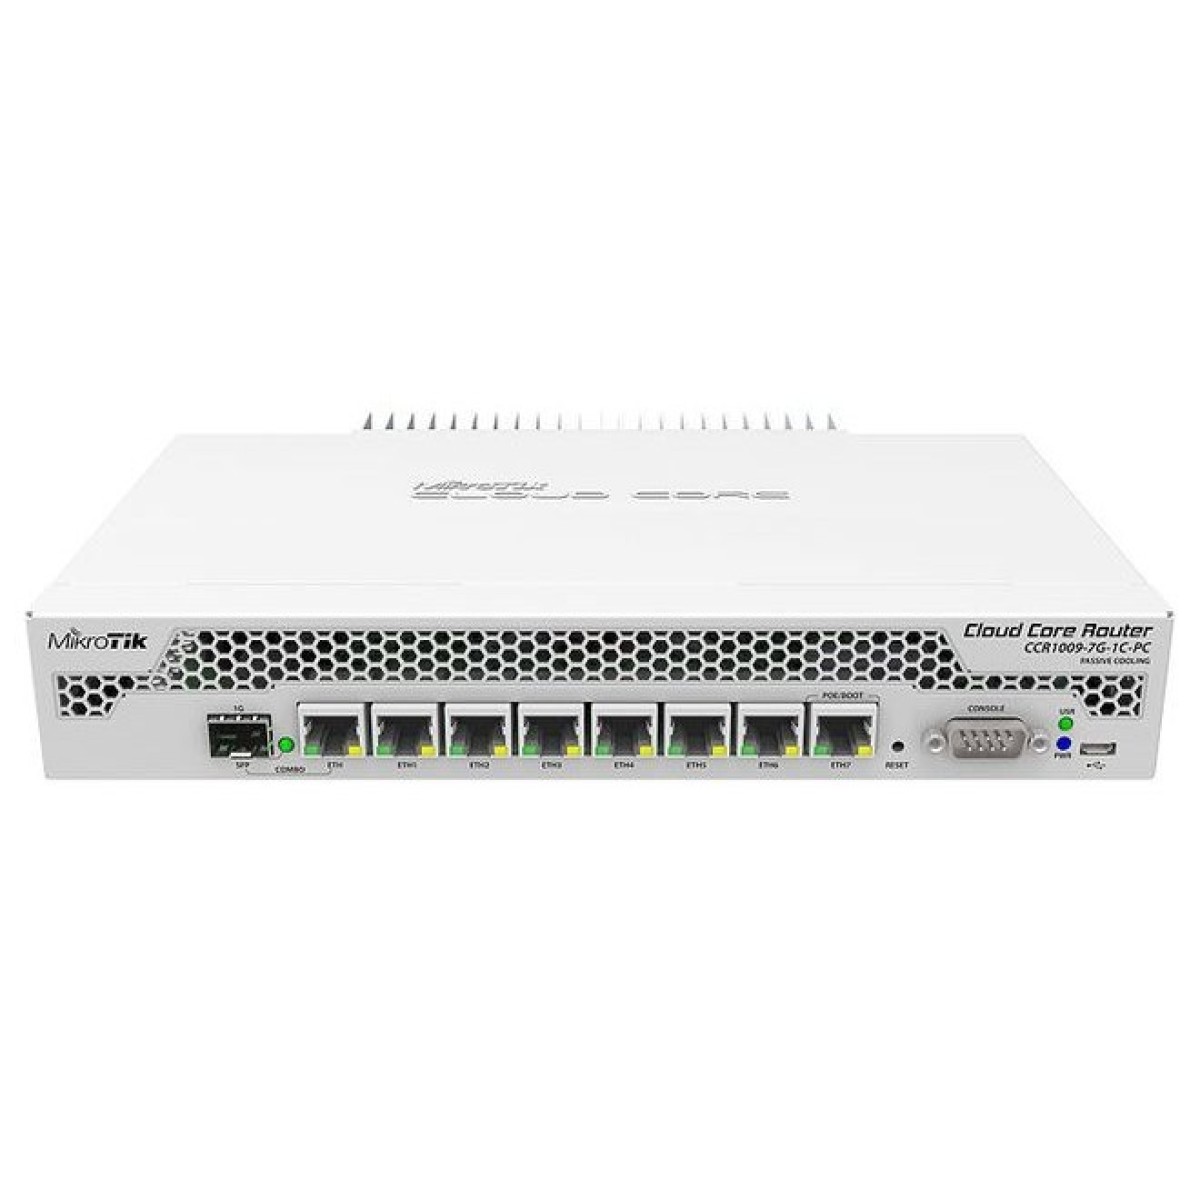 Маршрутизатор MikroTik Cloud Core Router (CCR1009-7G-1C-PC) 98_98.jpg - фото 1